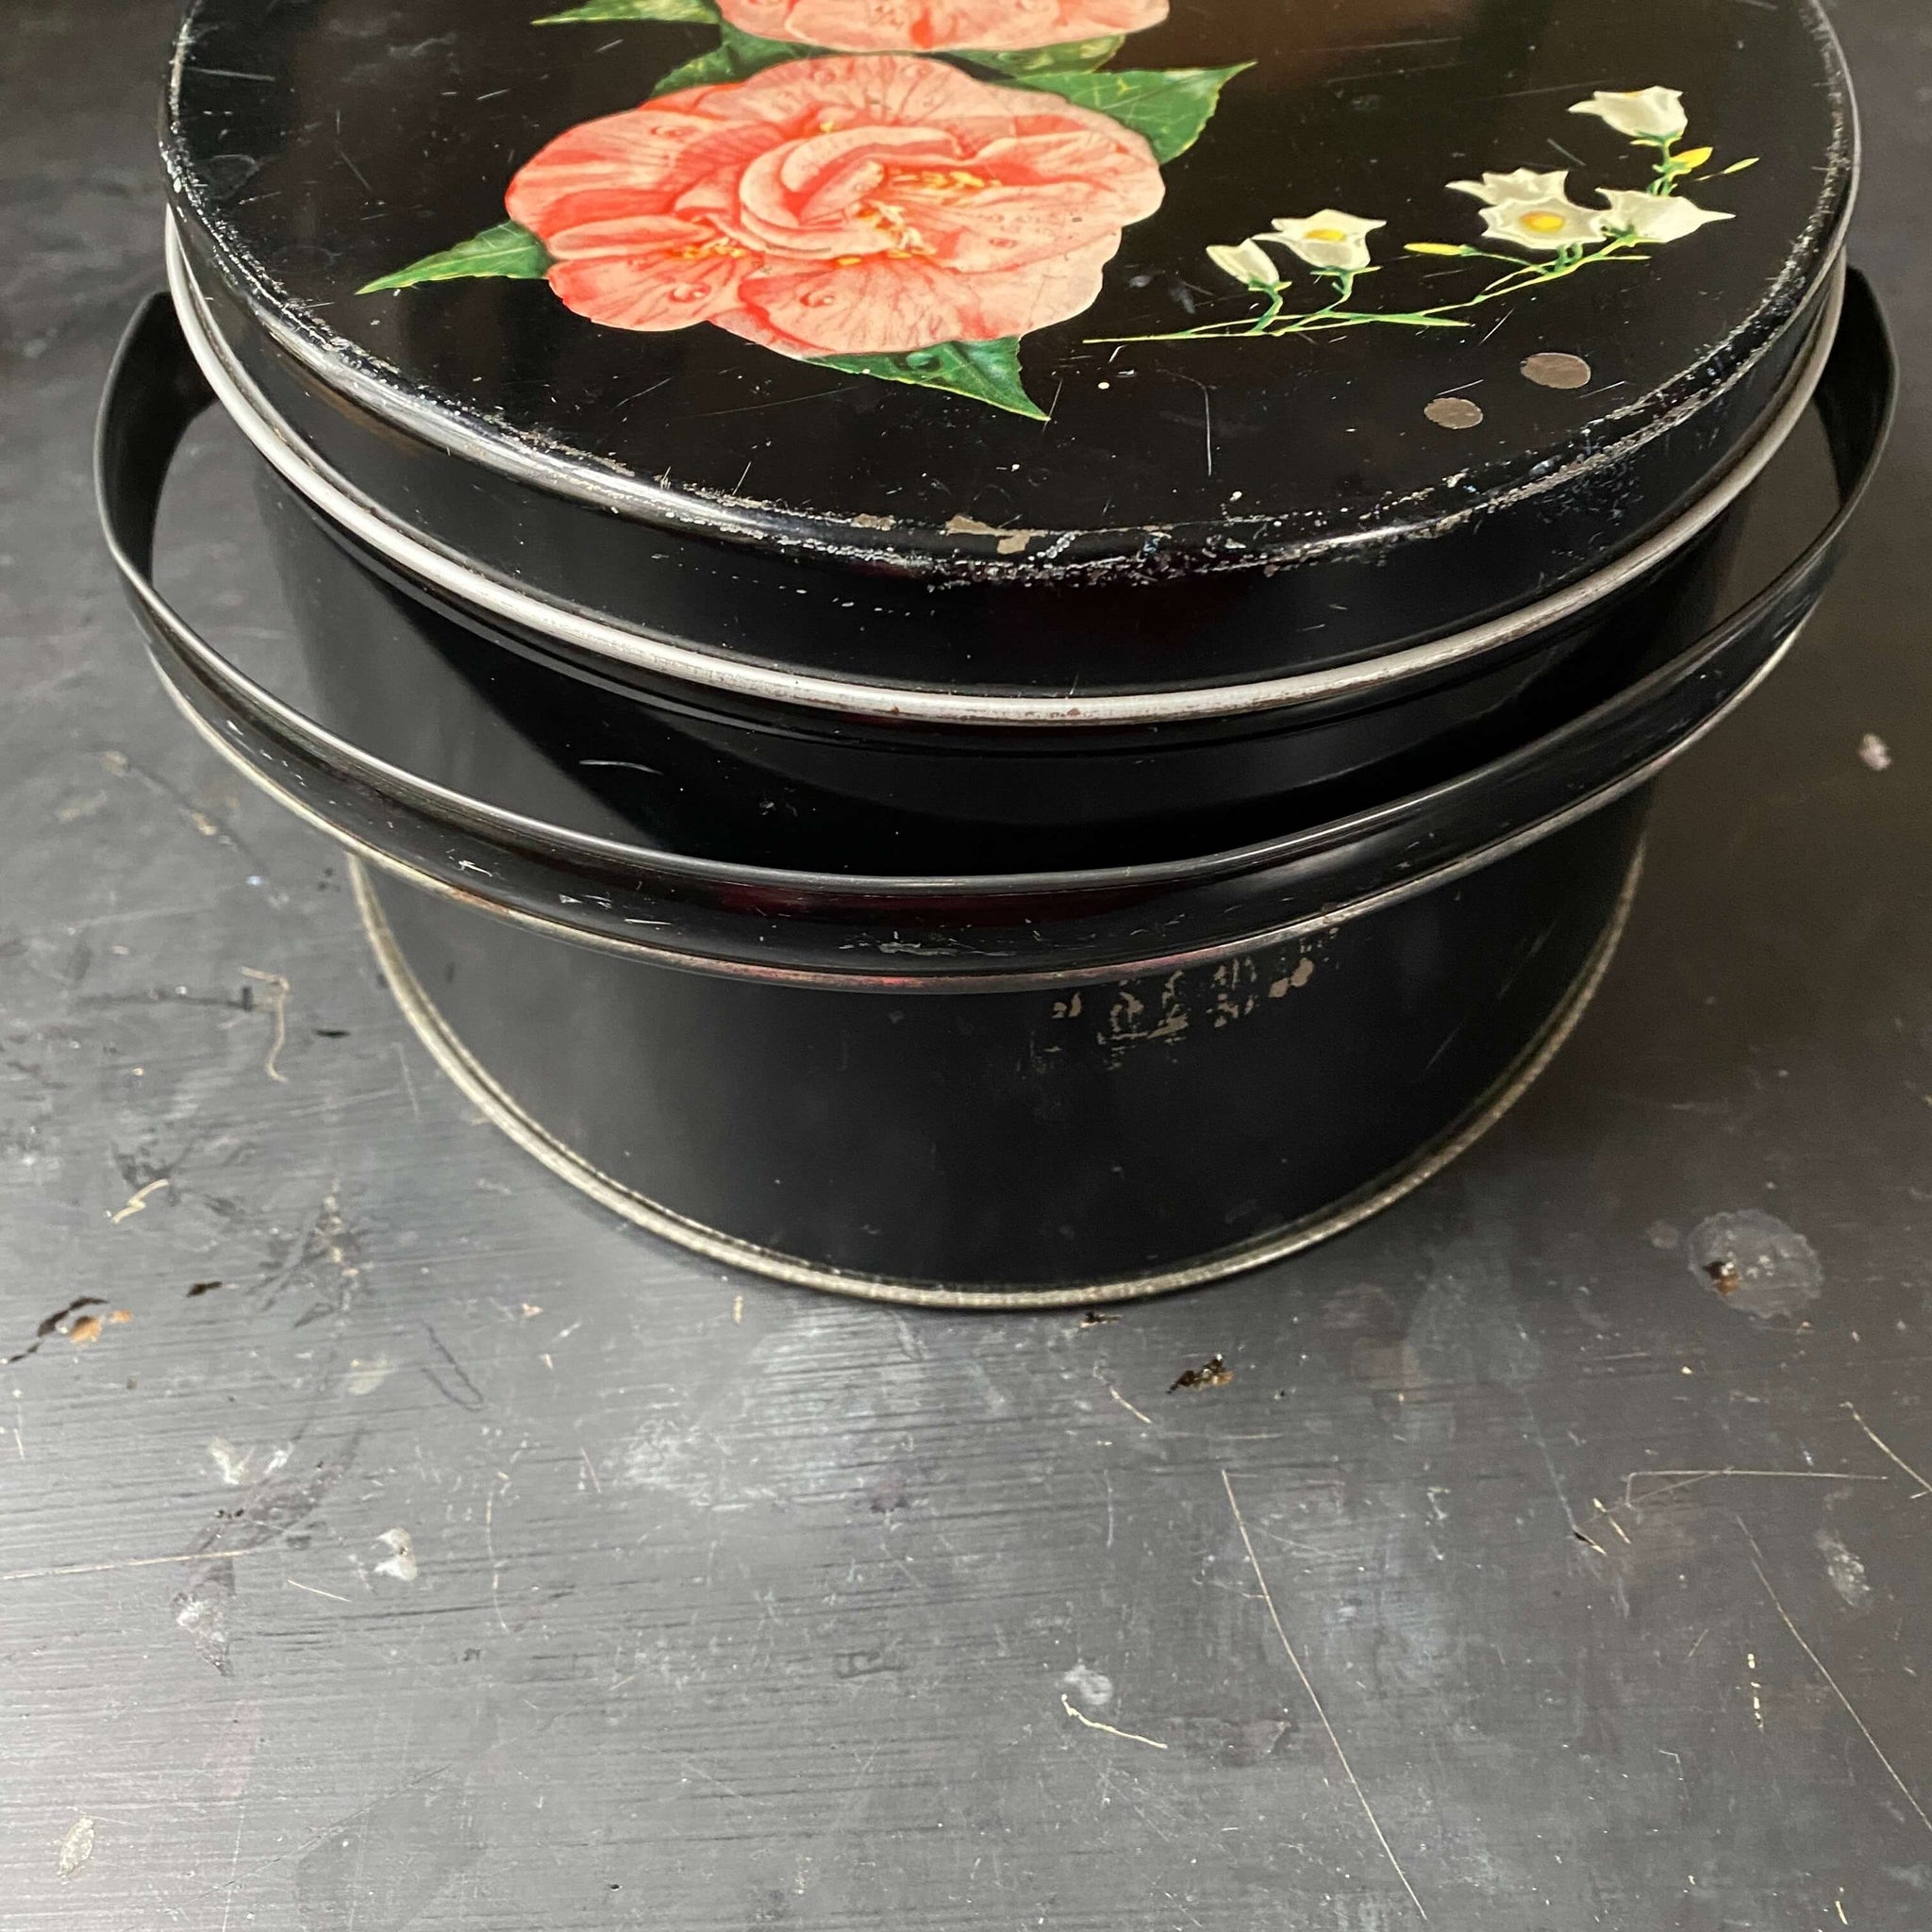 Vintage 1950s Biscuit Tin with Handles Pink Camellia Flowers and Lilies of the Valley